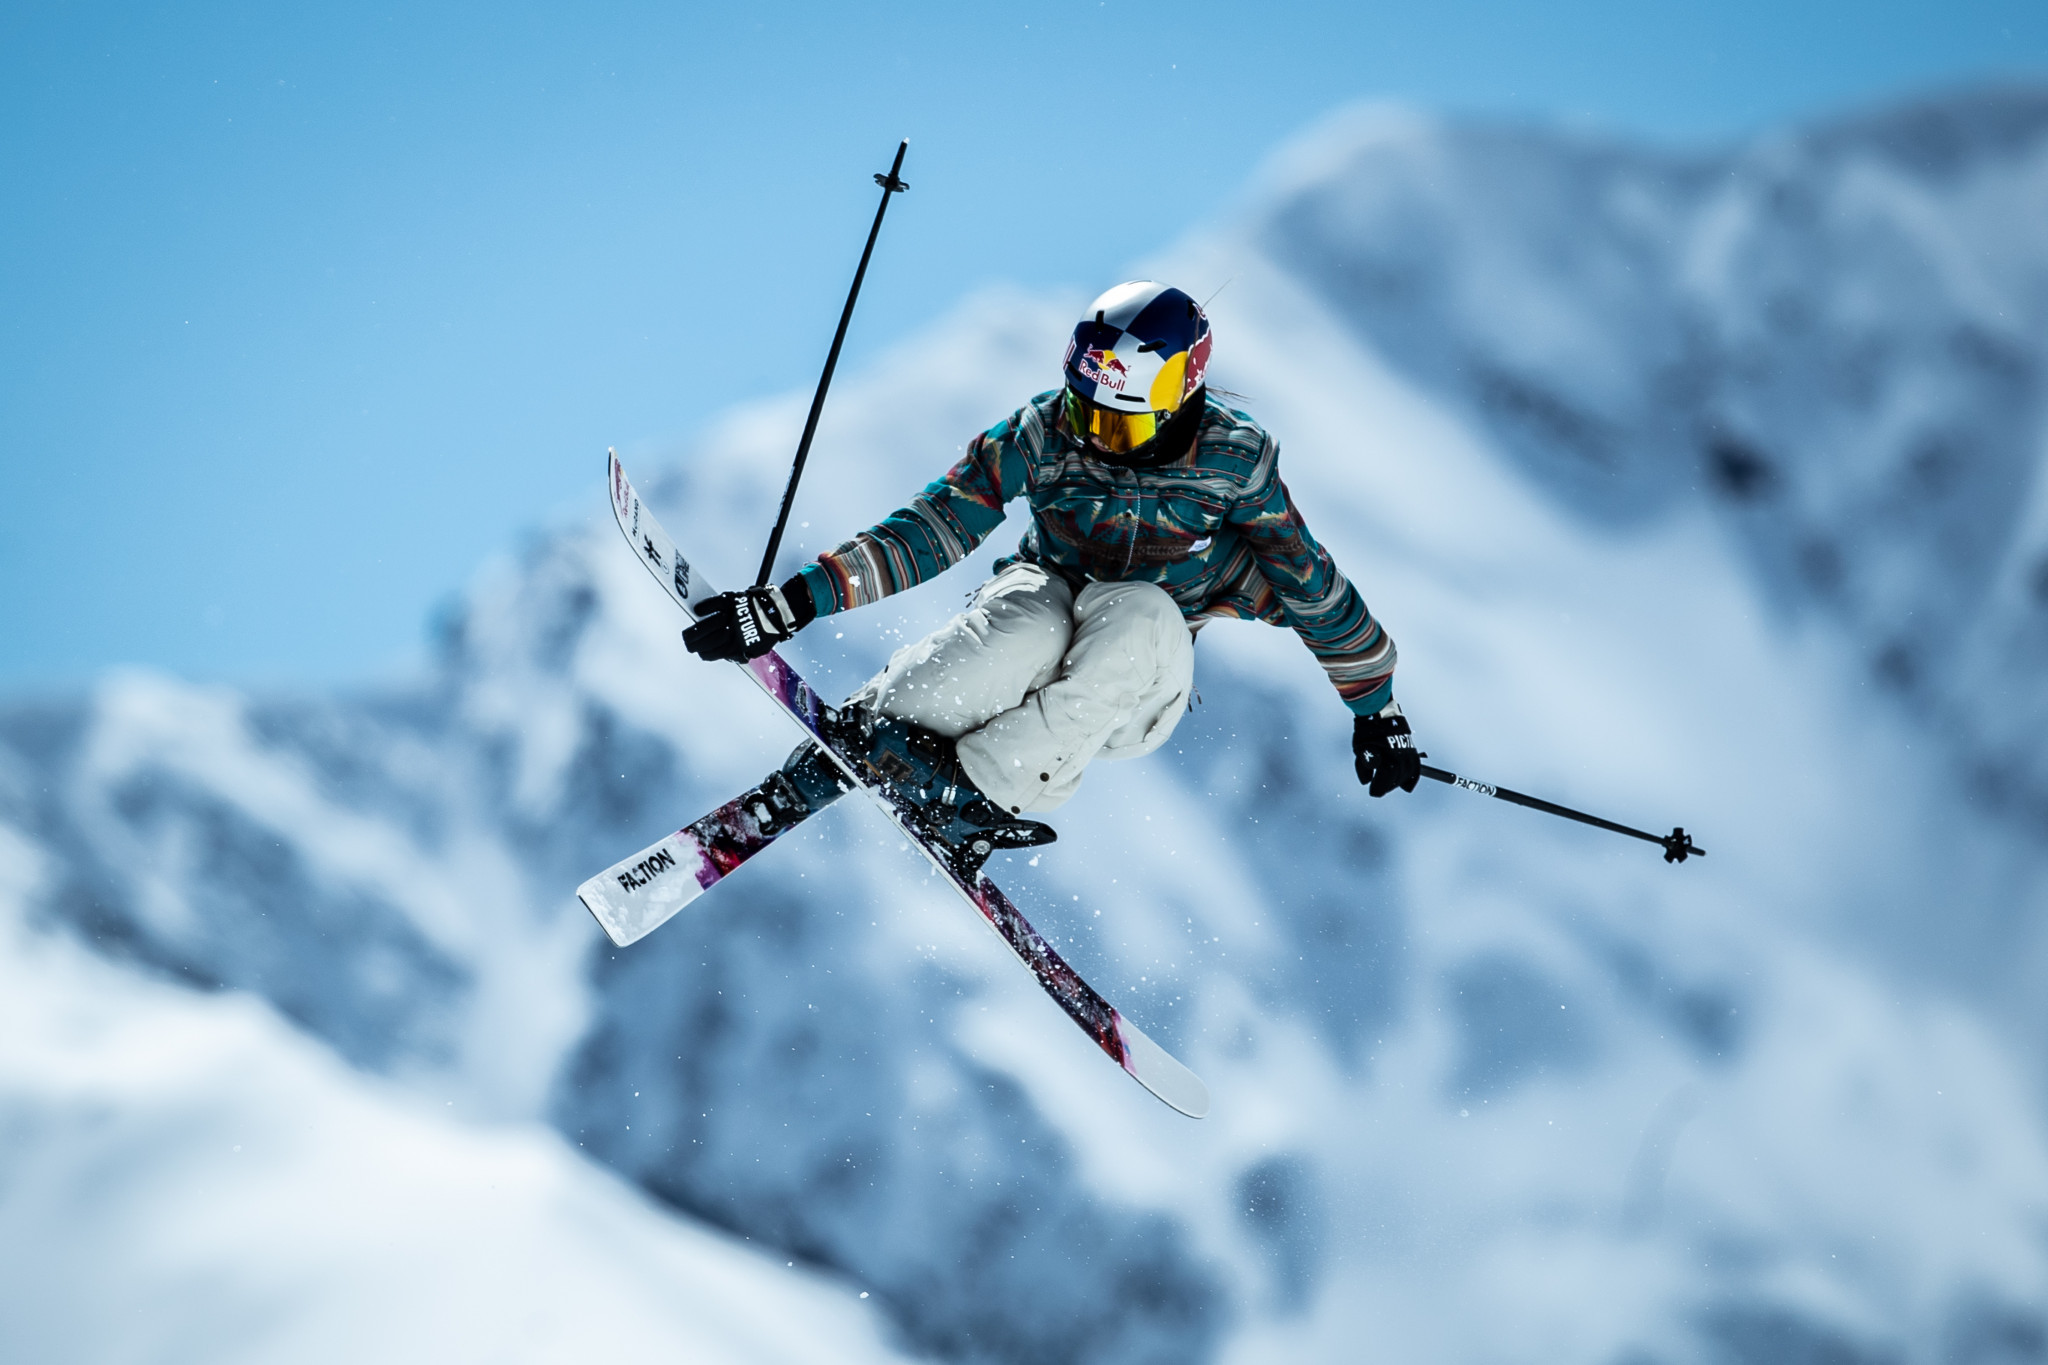 Switzerland's Mathilde Gremaud, who tops this season's FIS freeski big air World Cup rankings, is ready to take on the Beijing ramp tomorrow ©Getty Images